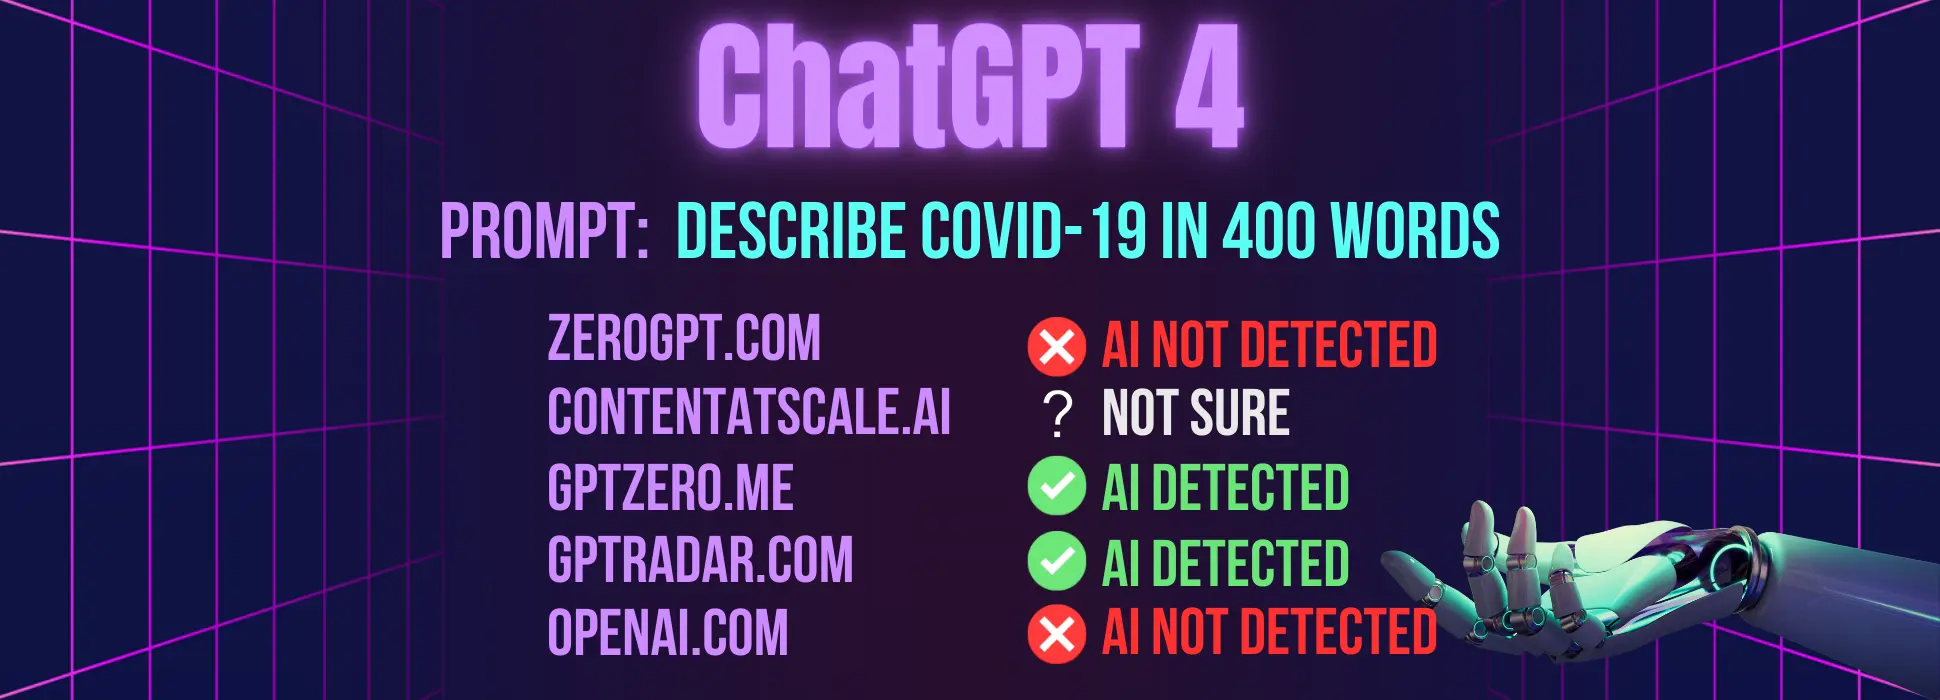 ChatGPT 4.0 results for prompt #2